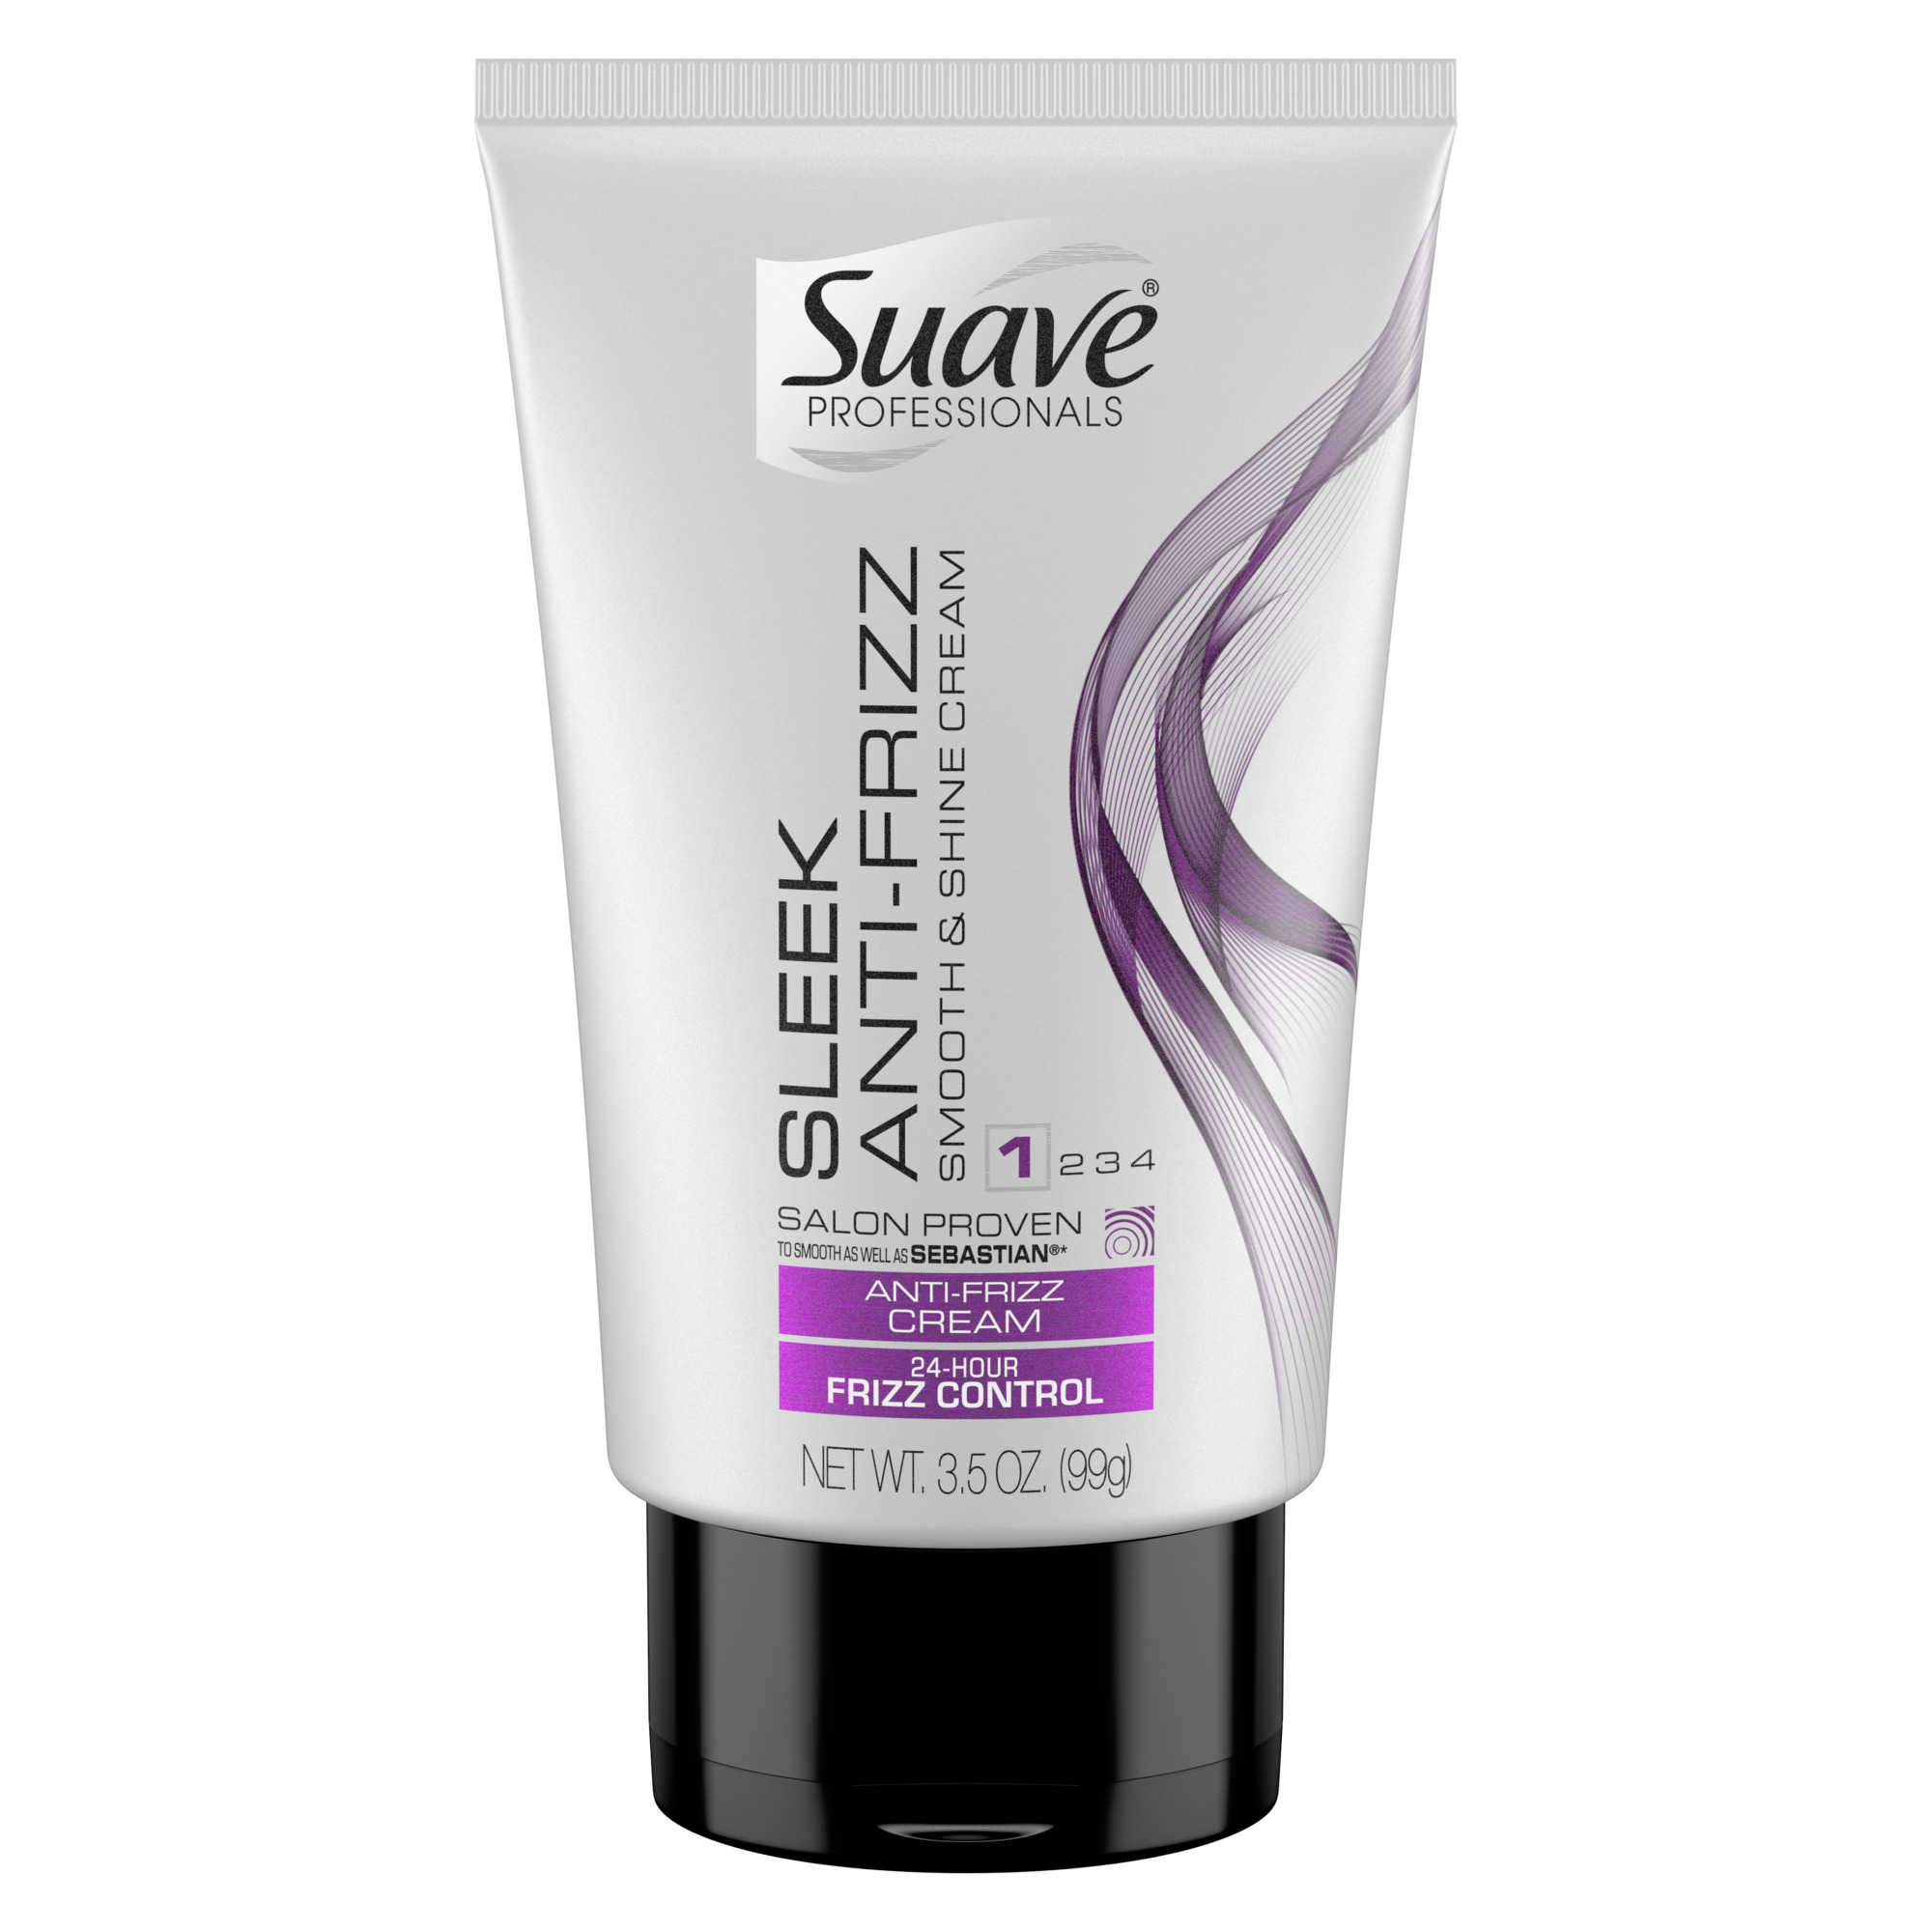 Suave Professionals Frizz Control Shine Enhancing Hair Styling Cream with Vitamin E, 3.5 oz - image 2 of 4